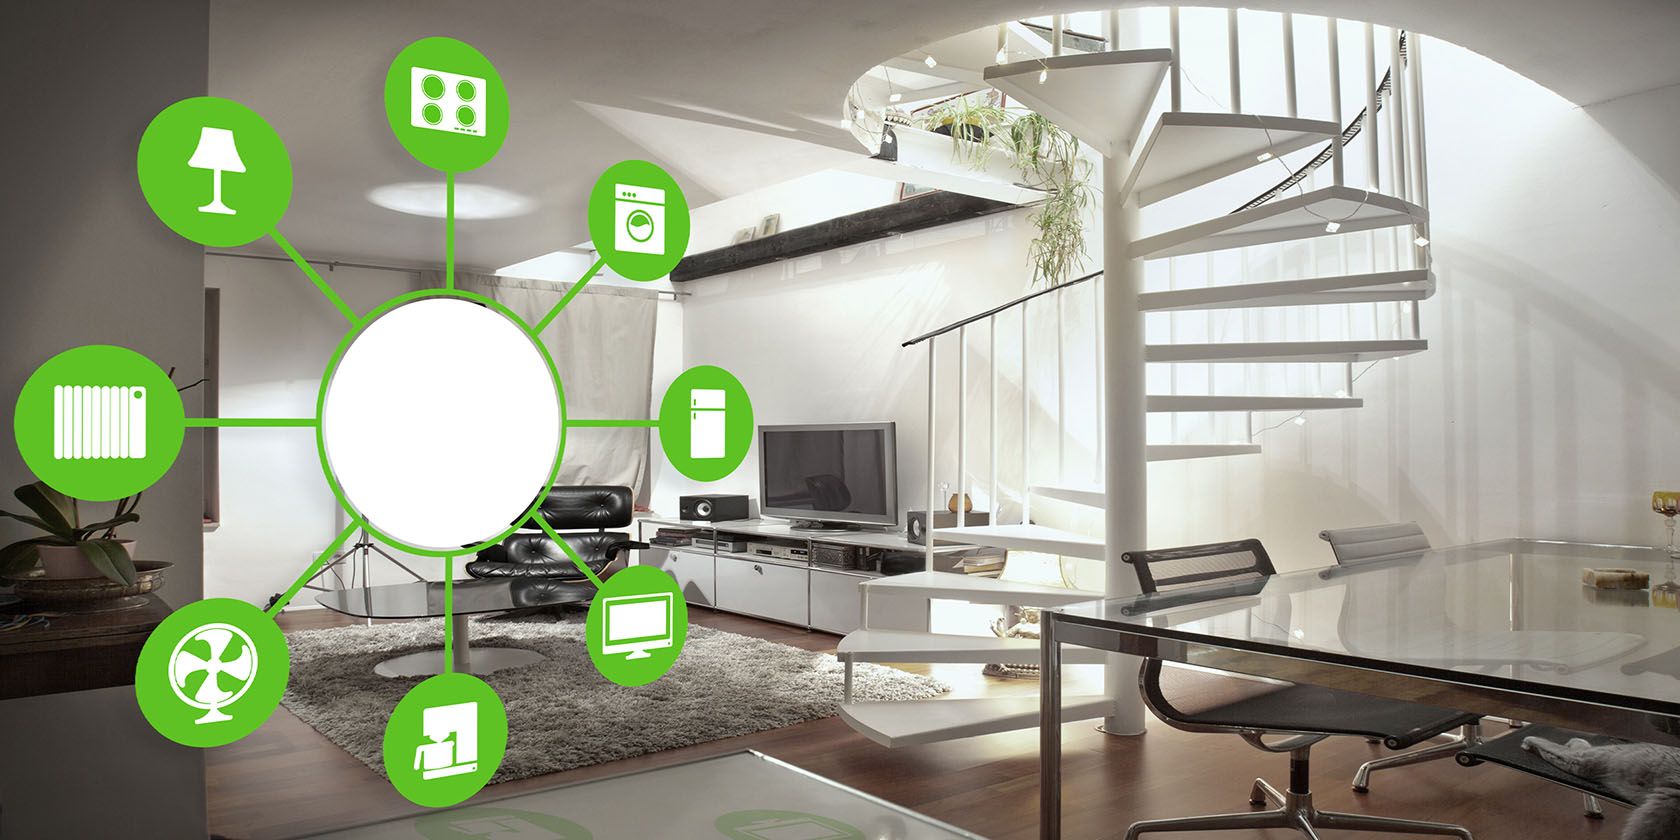 Attention Homeowners: 5 Smart Home Features Worth the Extra Cost